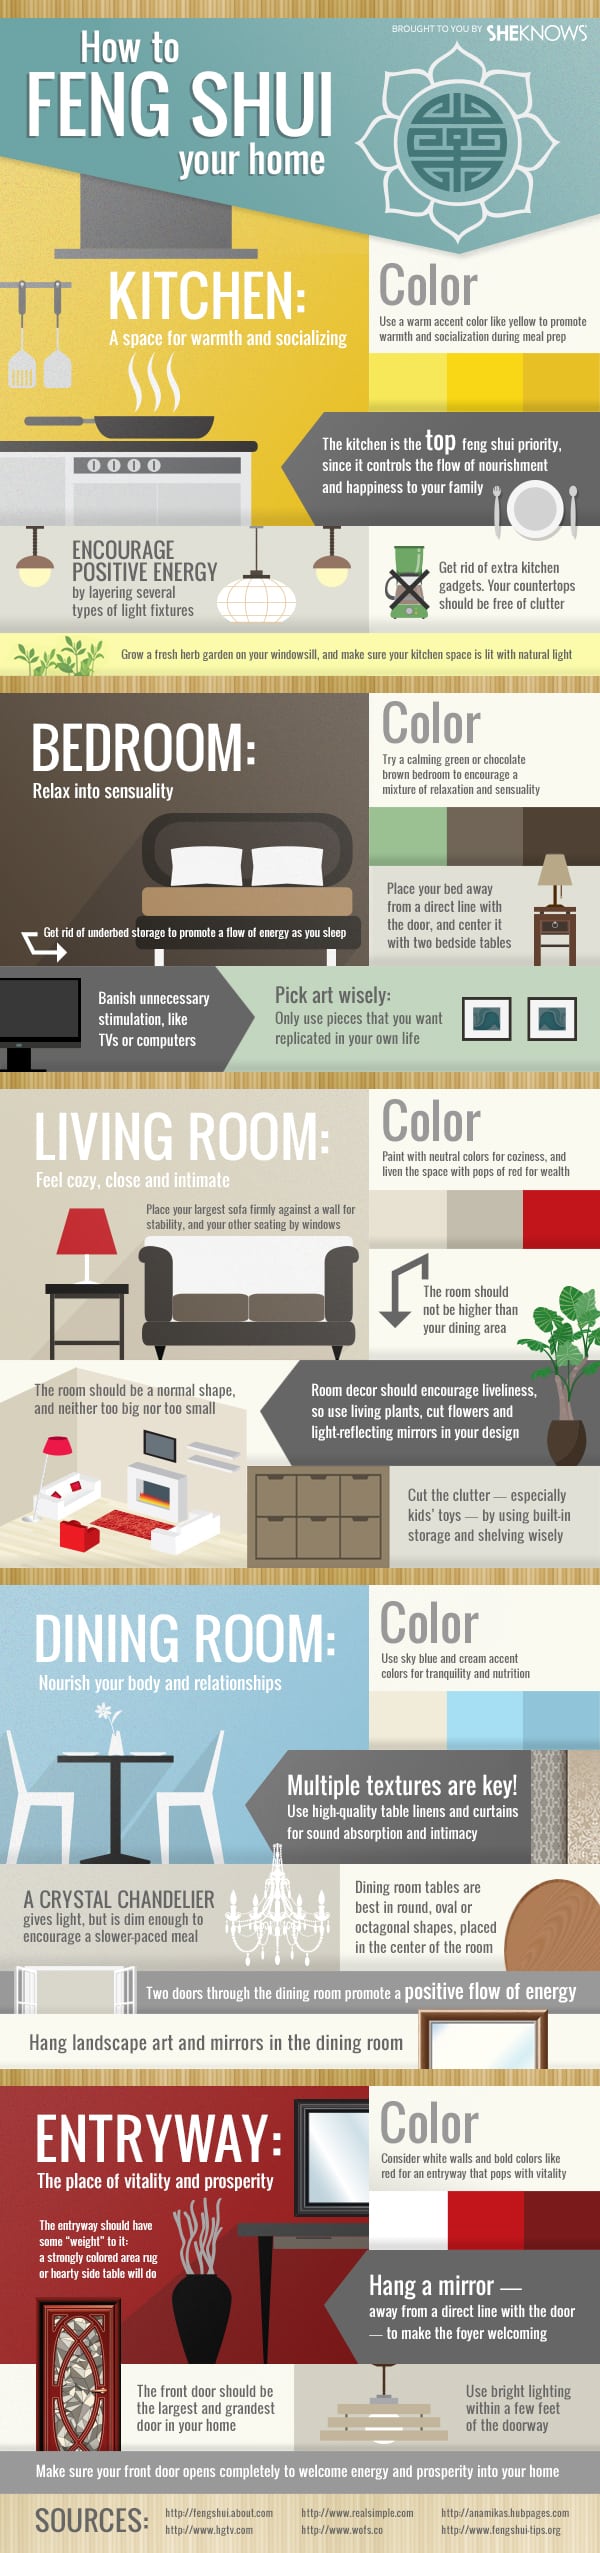 Tips on how to use feng shui in the home